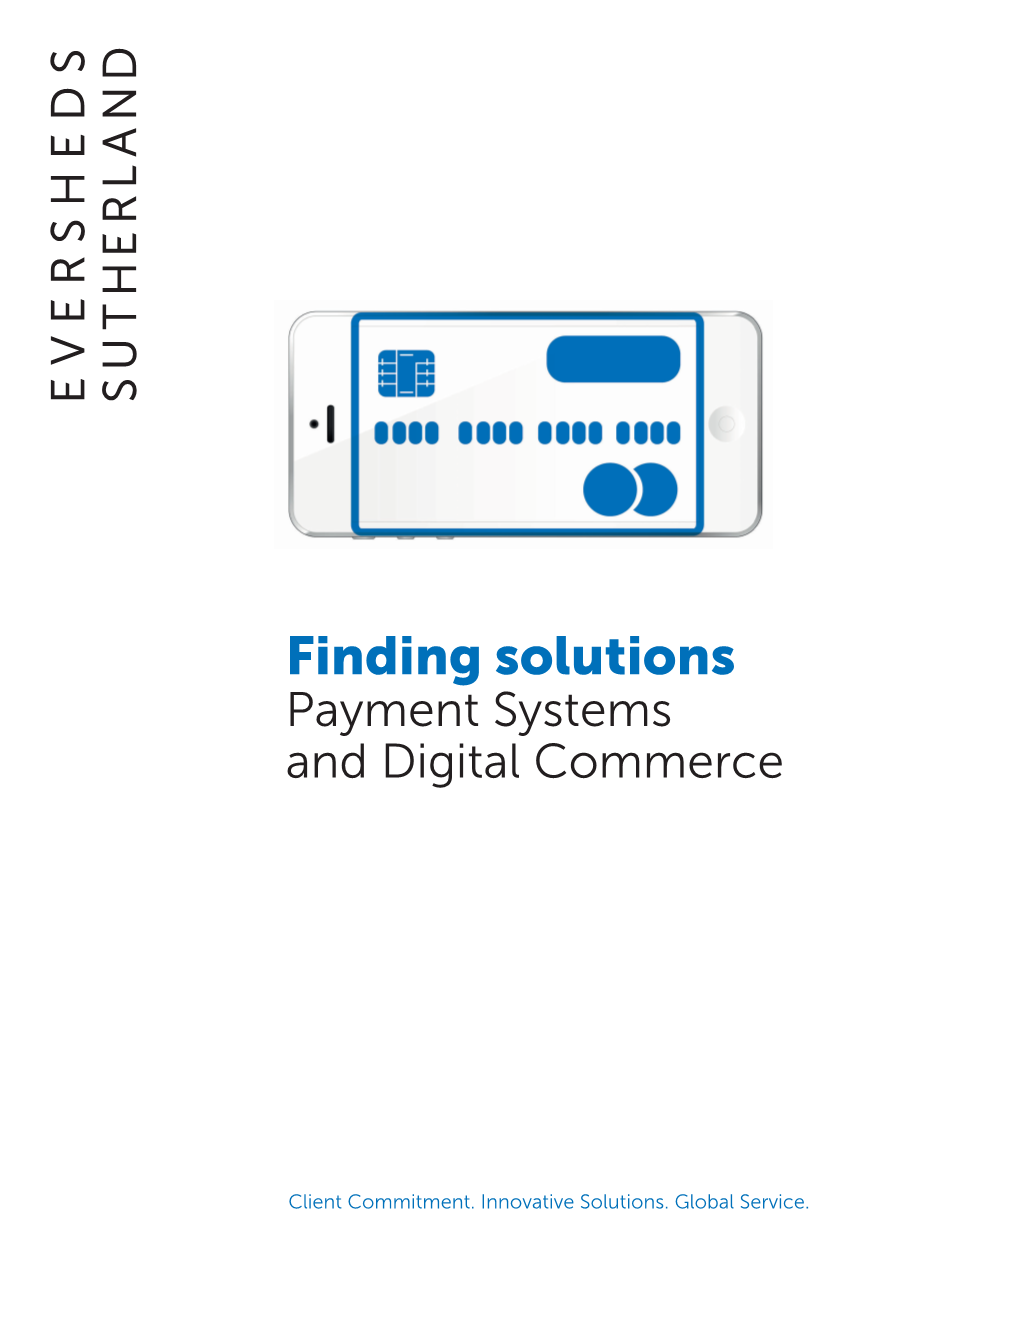 Finding Solutions Payment Systems and Digital Commerce